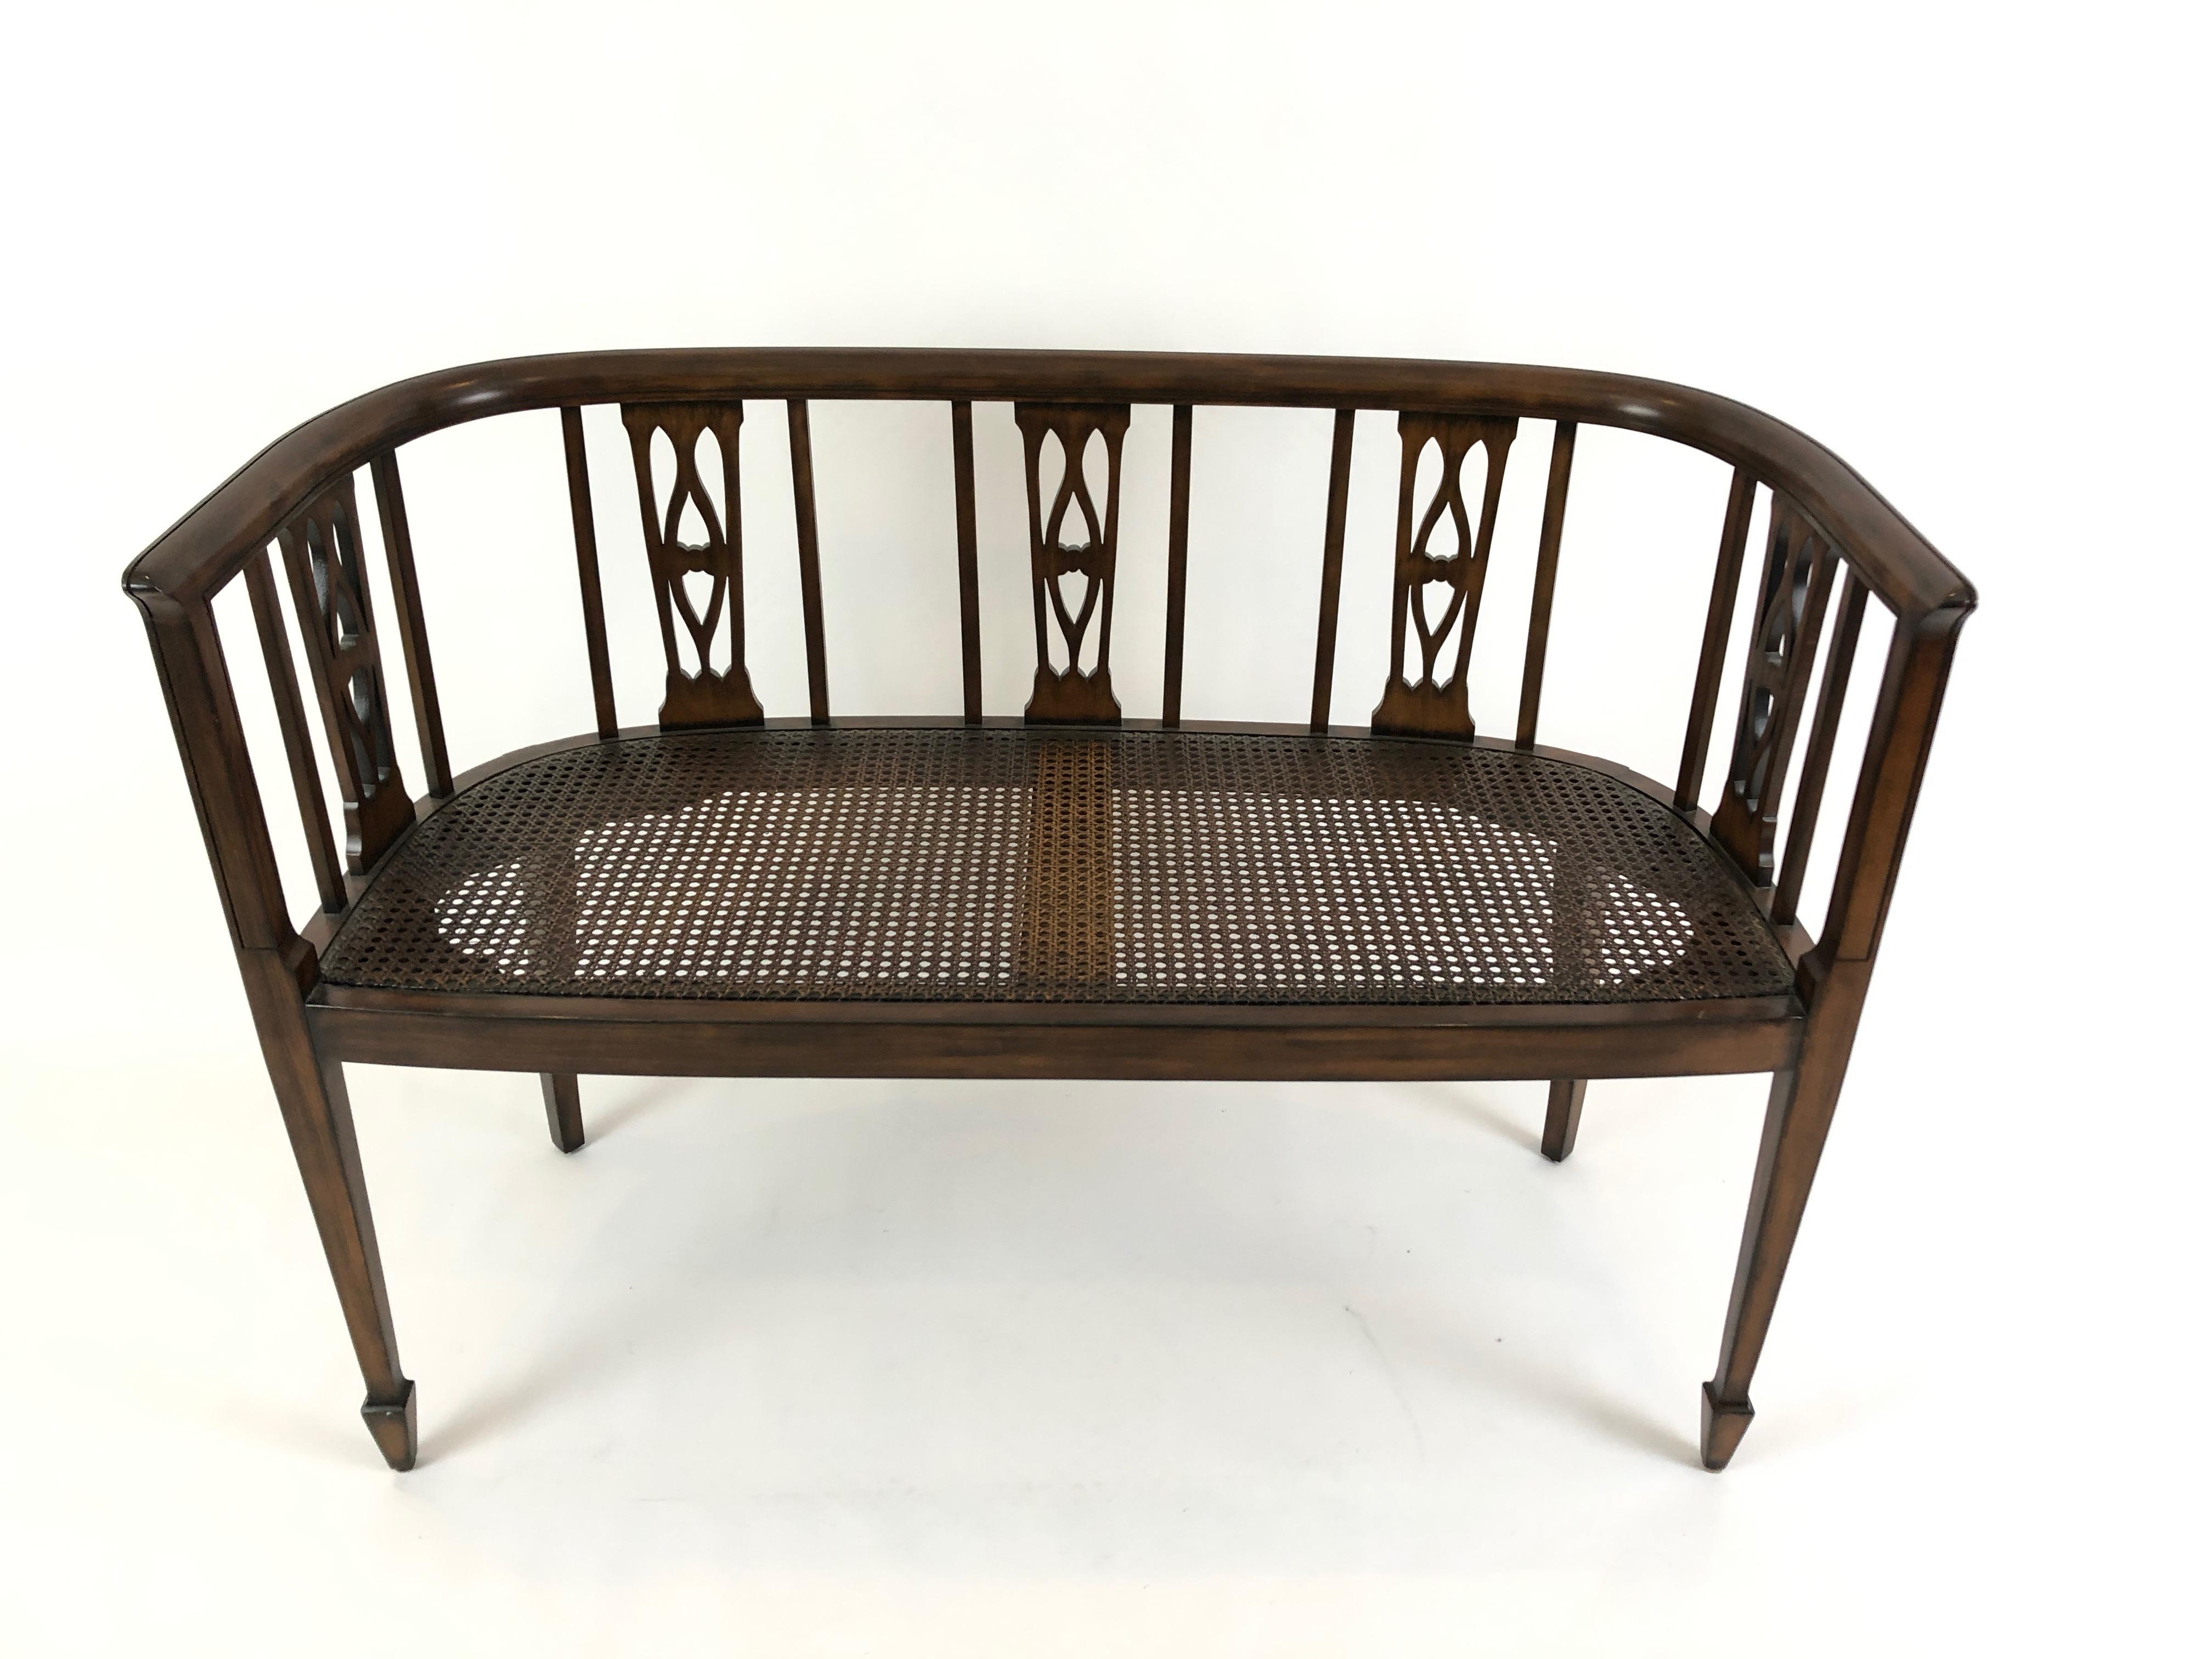 Refined fruitwood settee having lovely curved back with open fretwork, tapered legs and excellent condition caned seat. Custom cushion in a traditional small pattern and neutral color palette is included. Seat height without cushion 17.25.